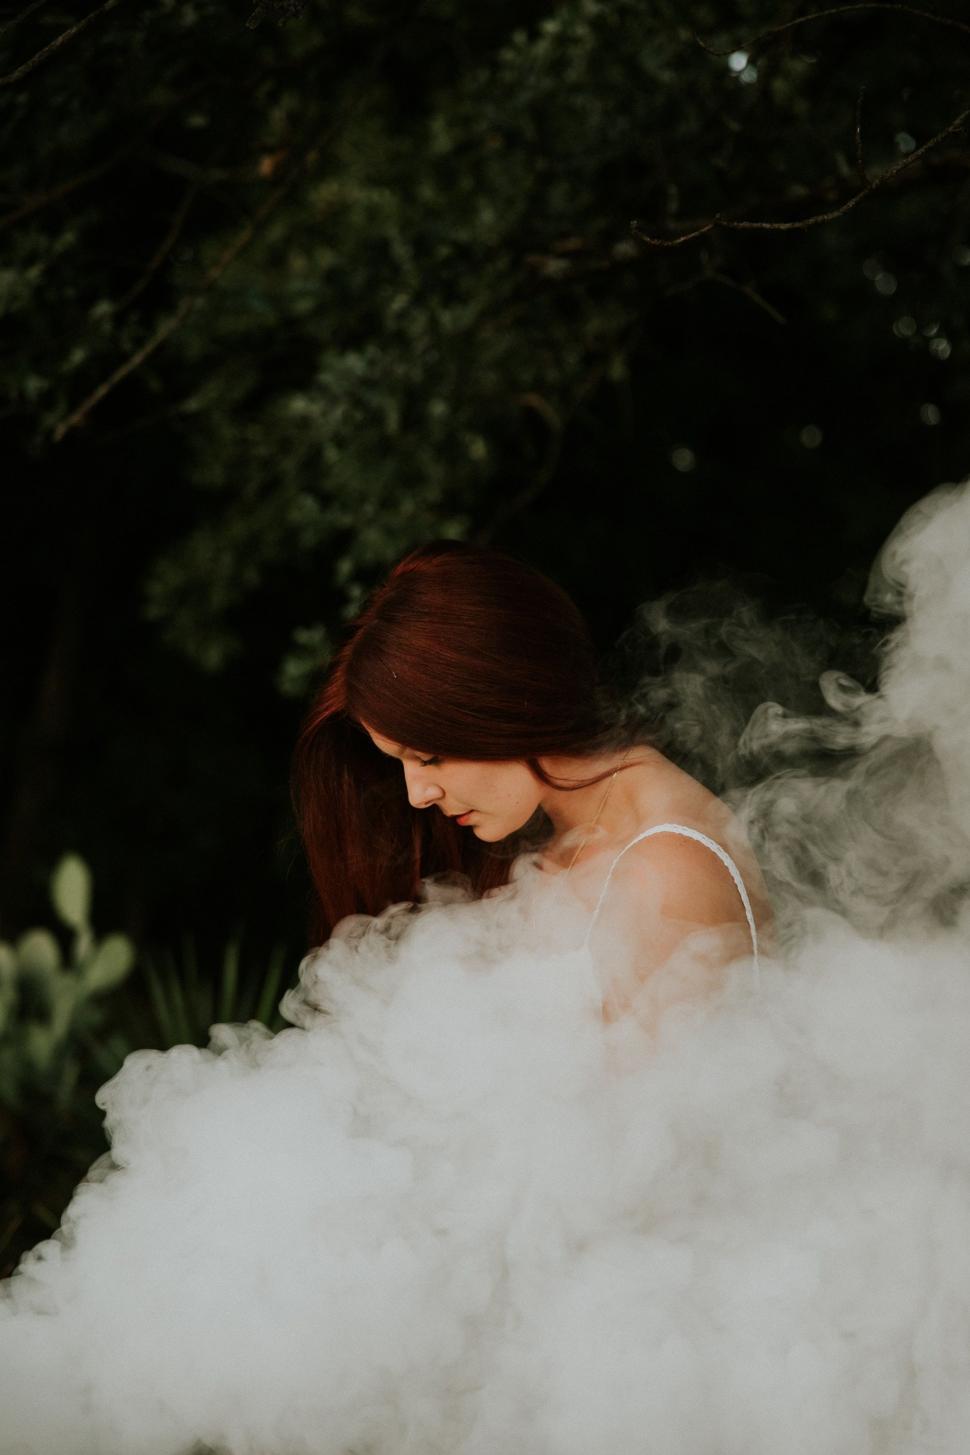 Free Image of Woman in White Dress Standing in Smoke 